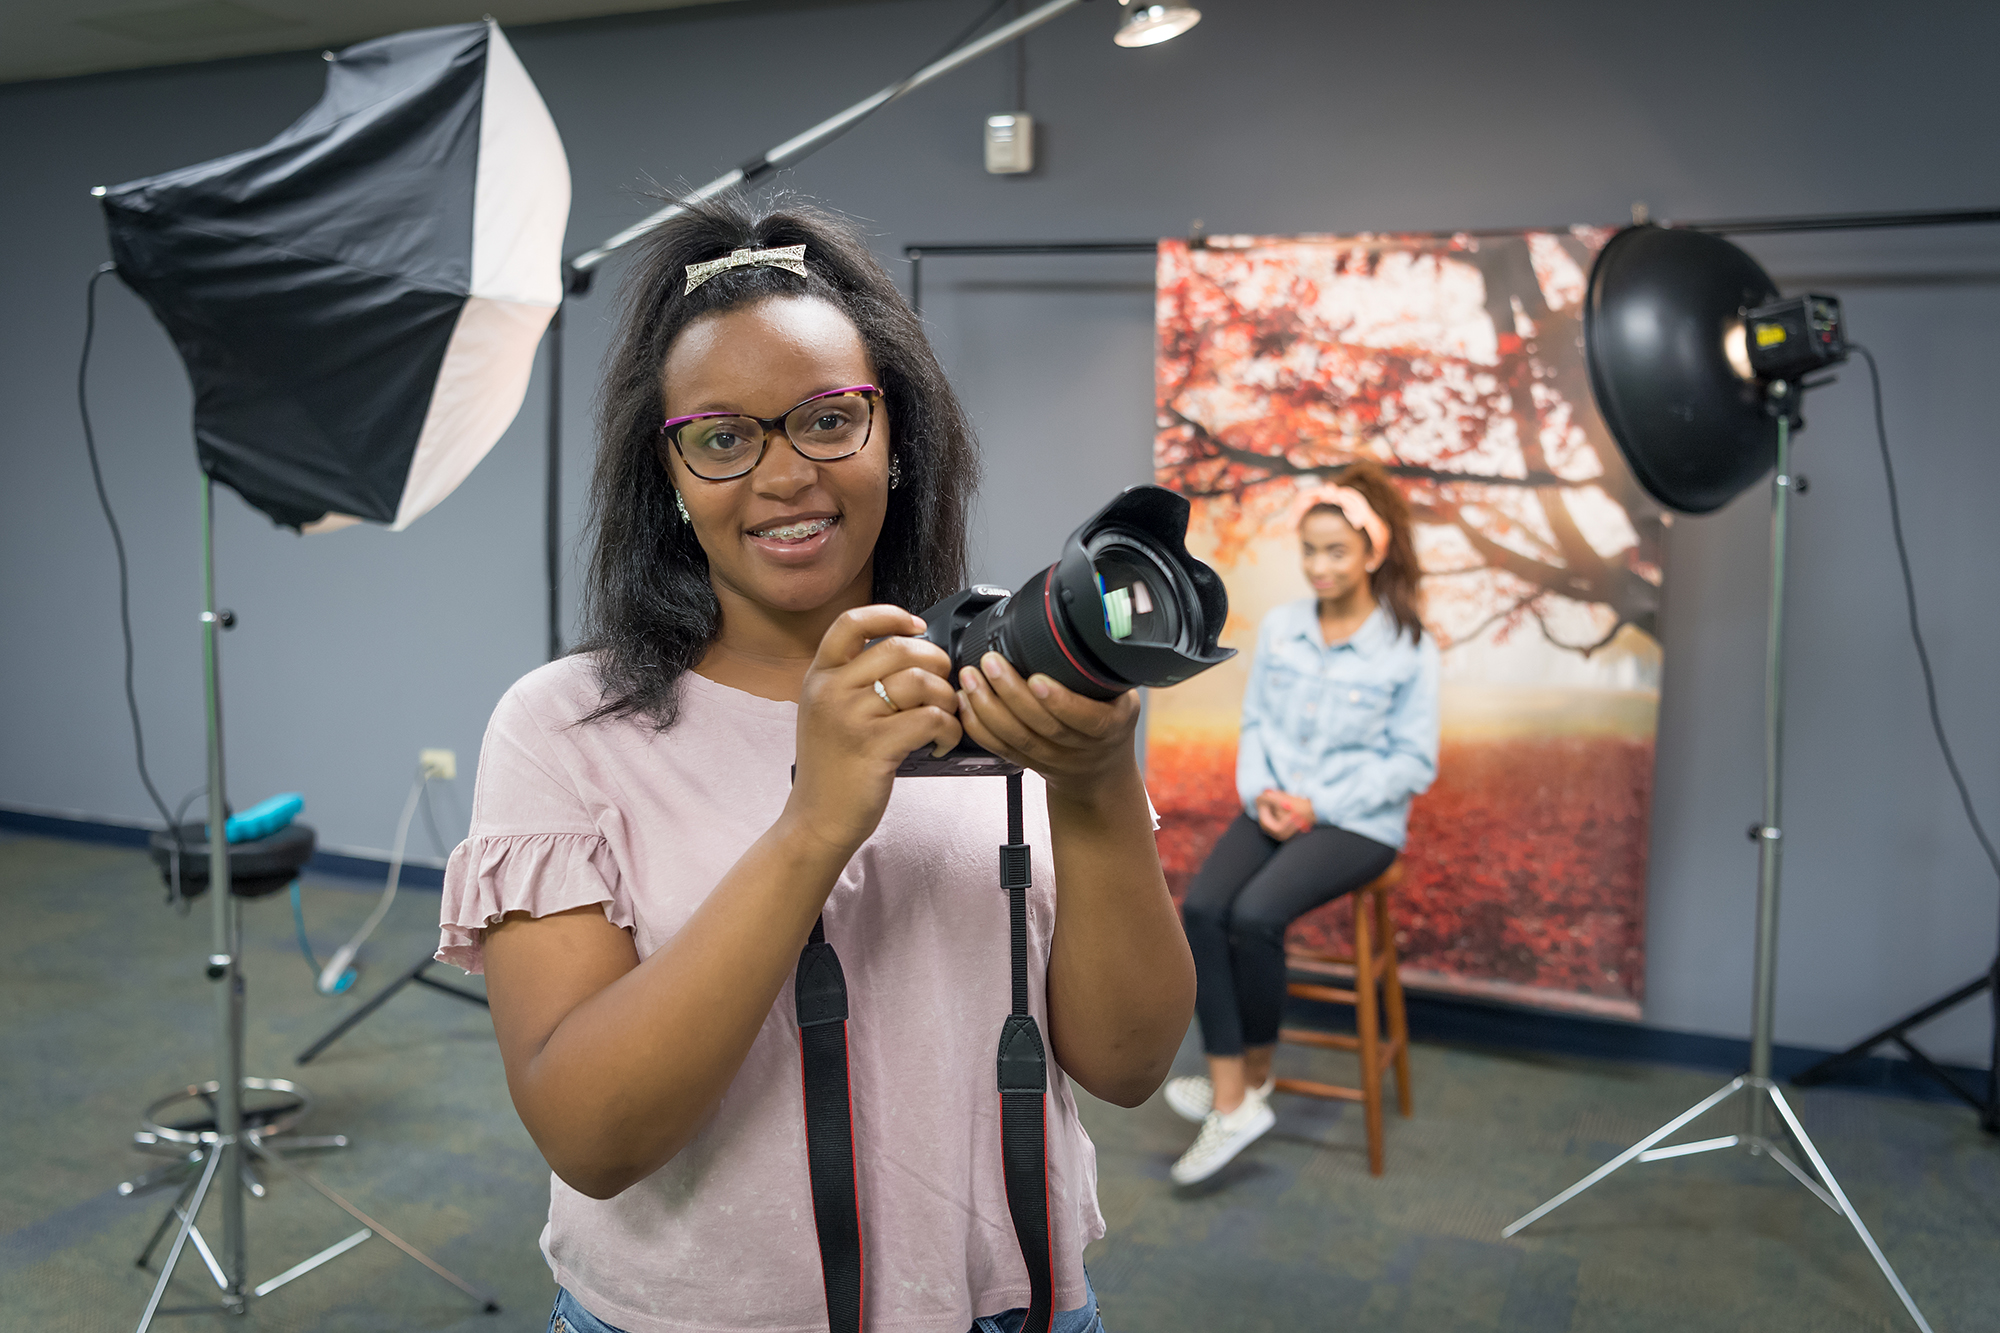 Student holding camera in camera studio with lights